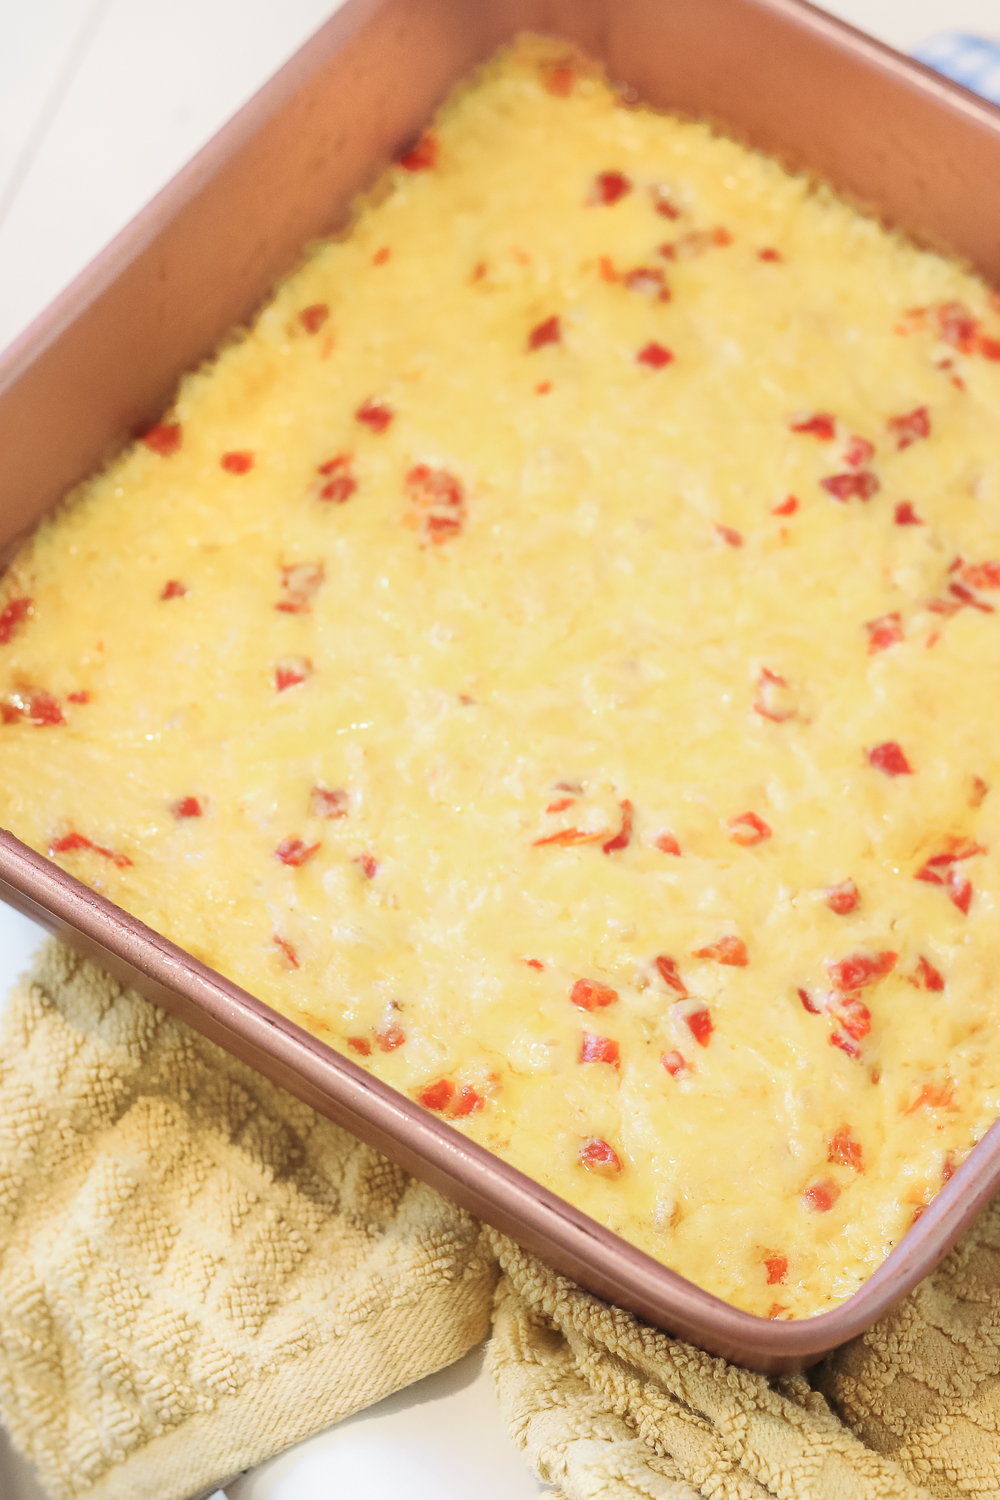 Warm pimento cheese dip recipe by southern lifestyle blogger Stephanie Ziajka on Diary of a Debutante